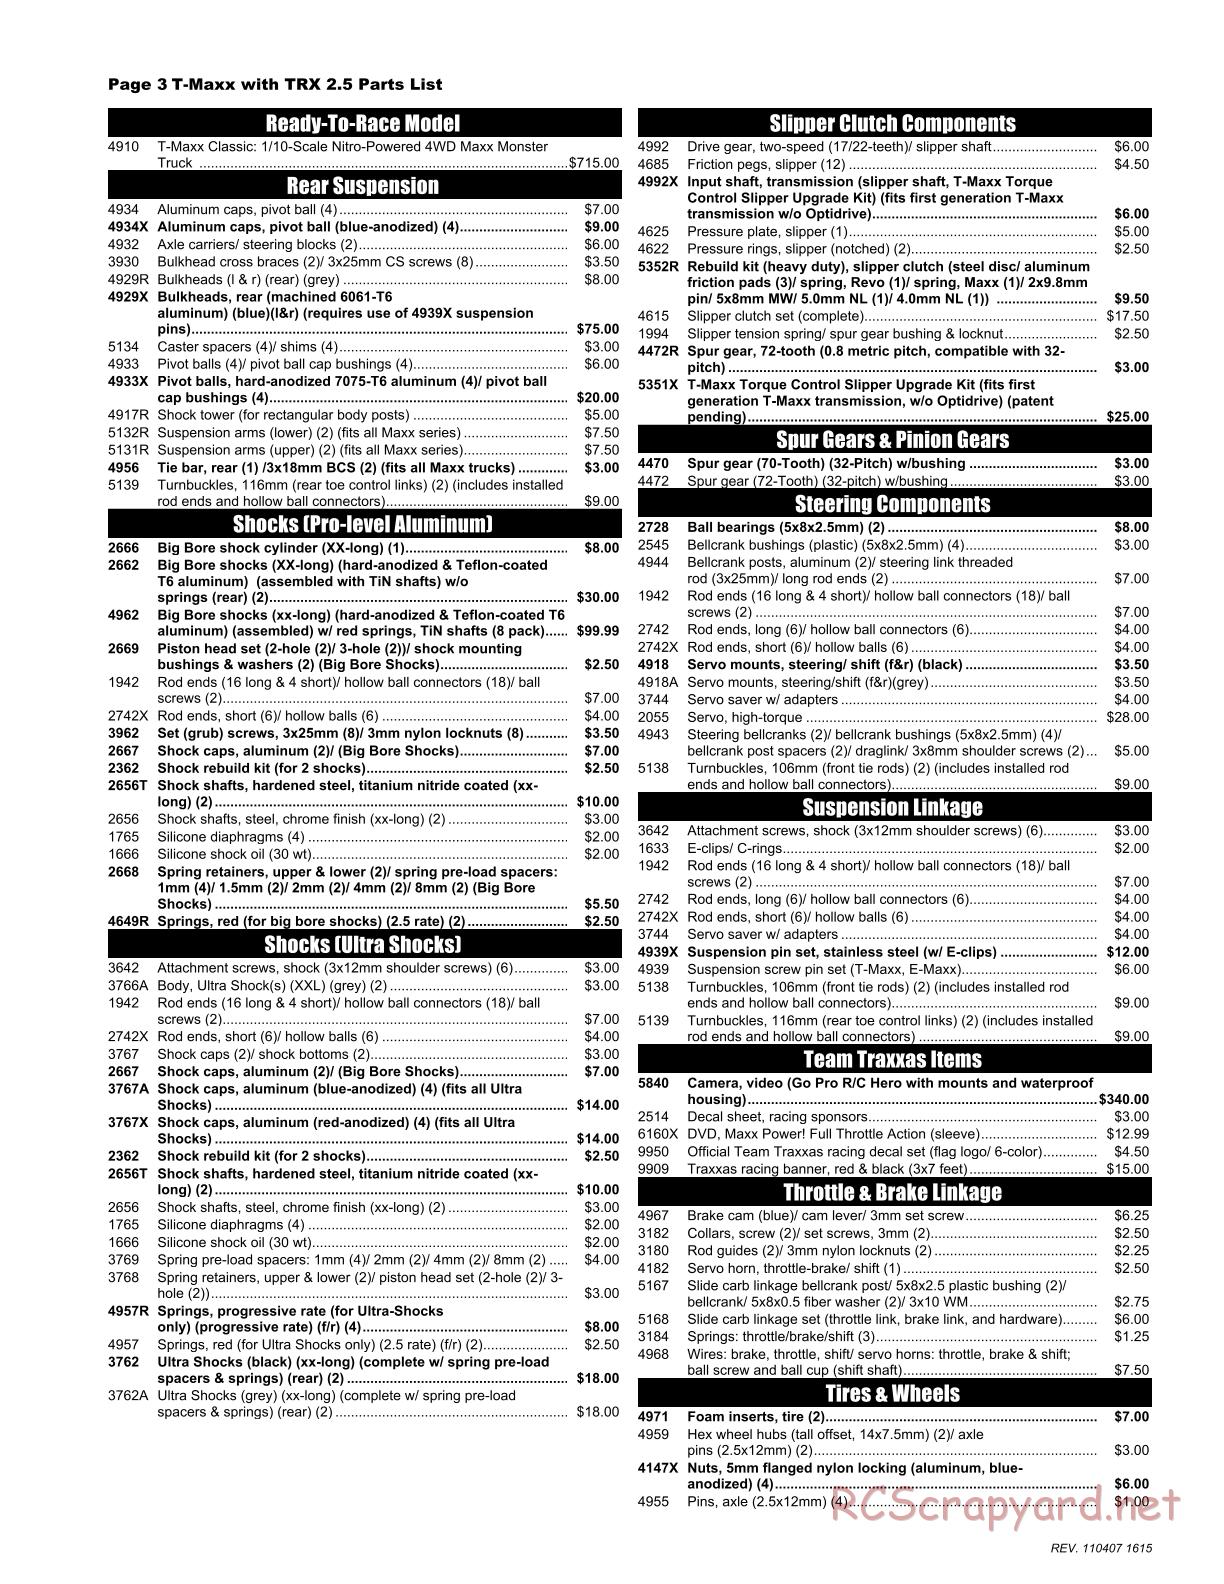 Traxxas - T-Maxx Classic (2008) - Parts List - Page 3